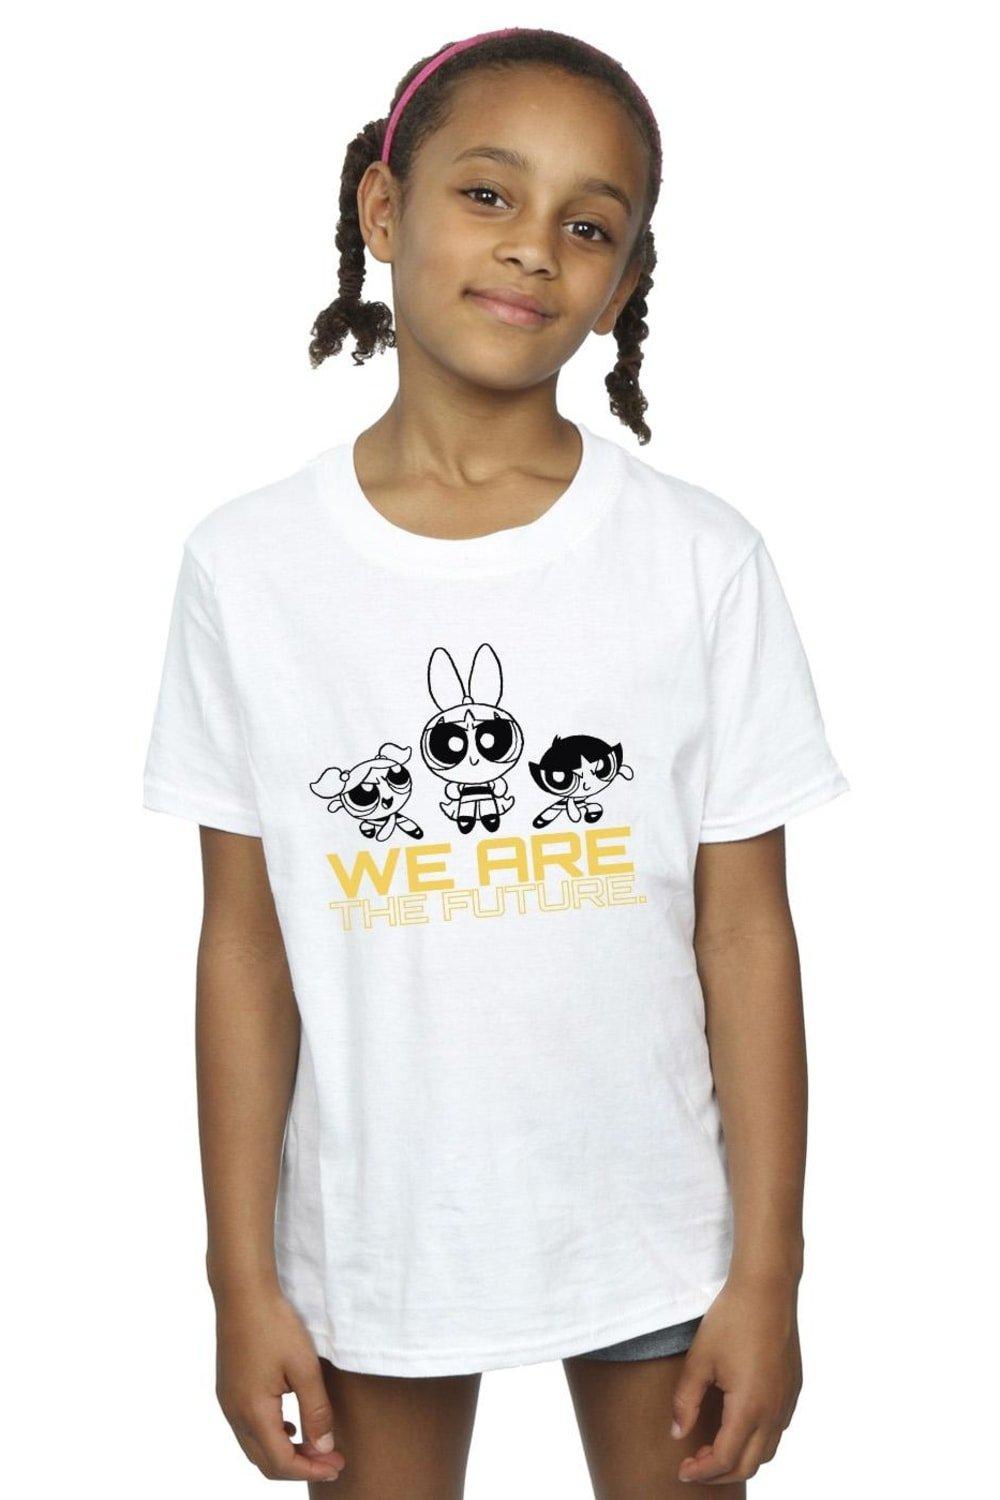 We Are The Future Cotton T-Shirt